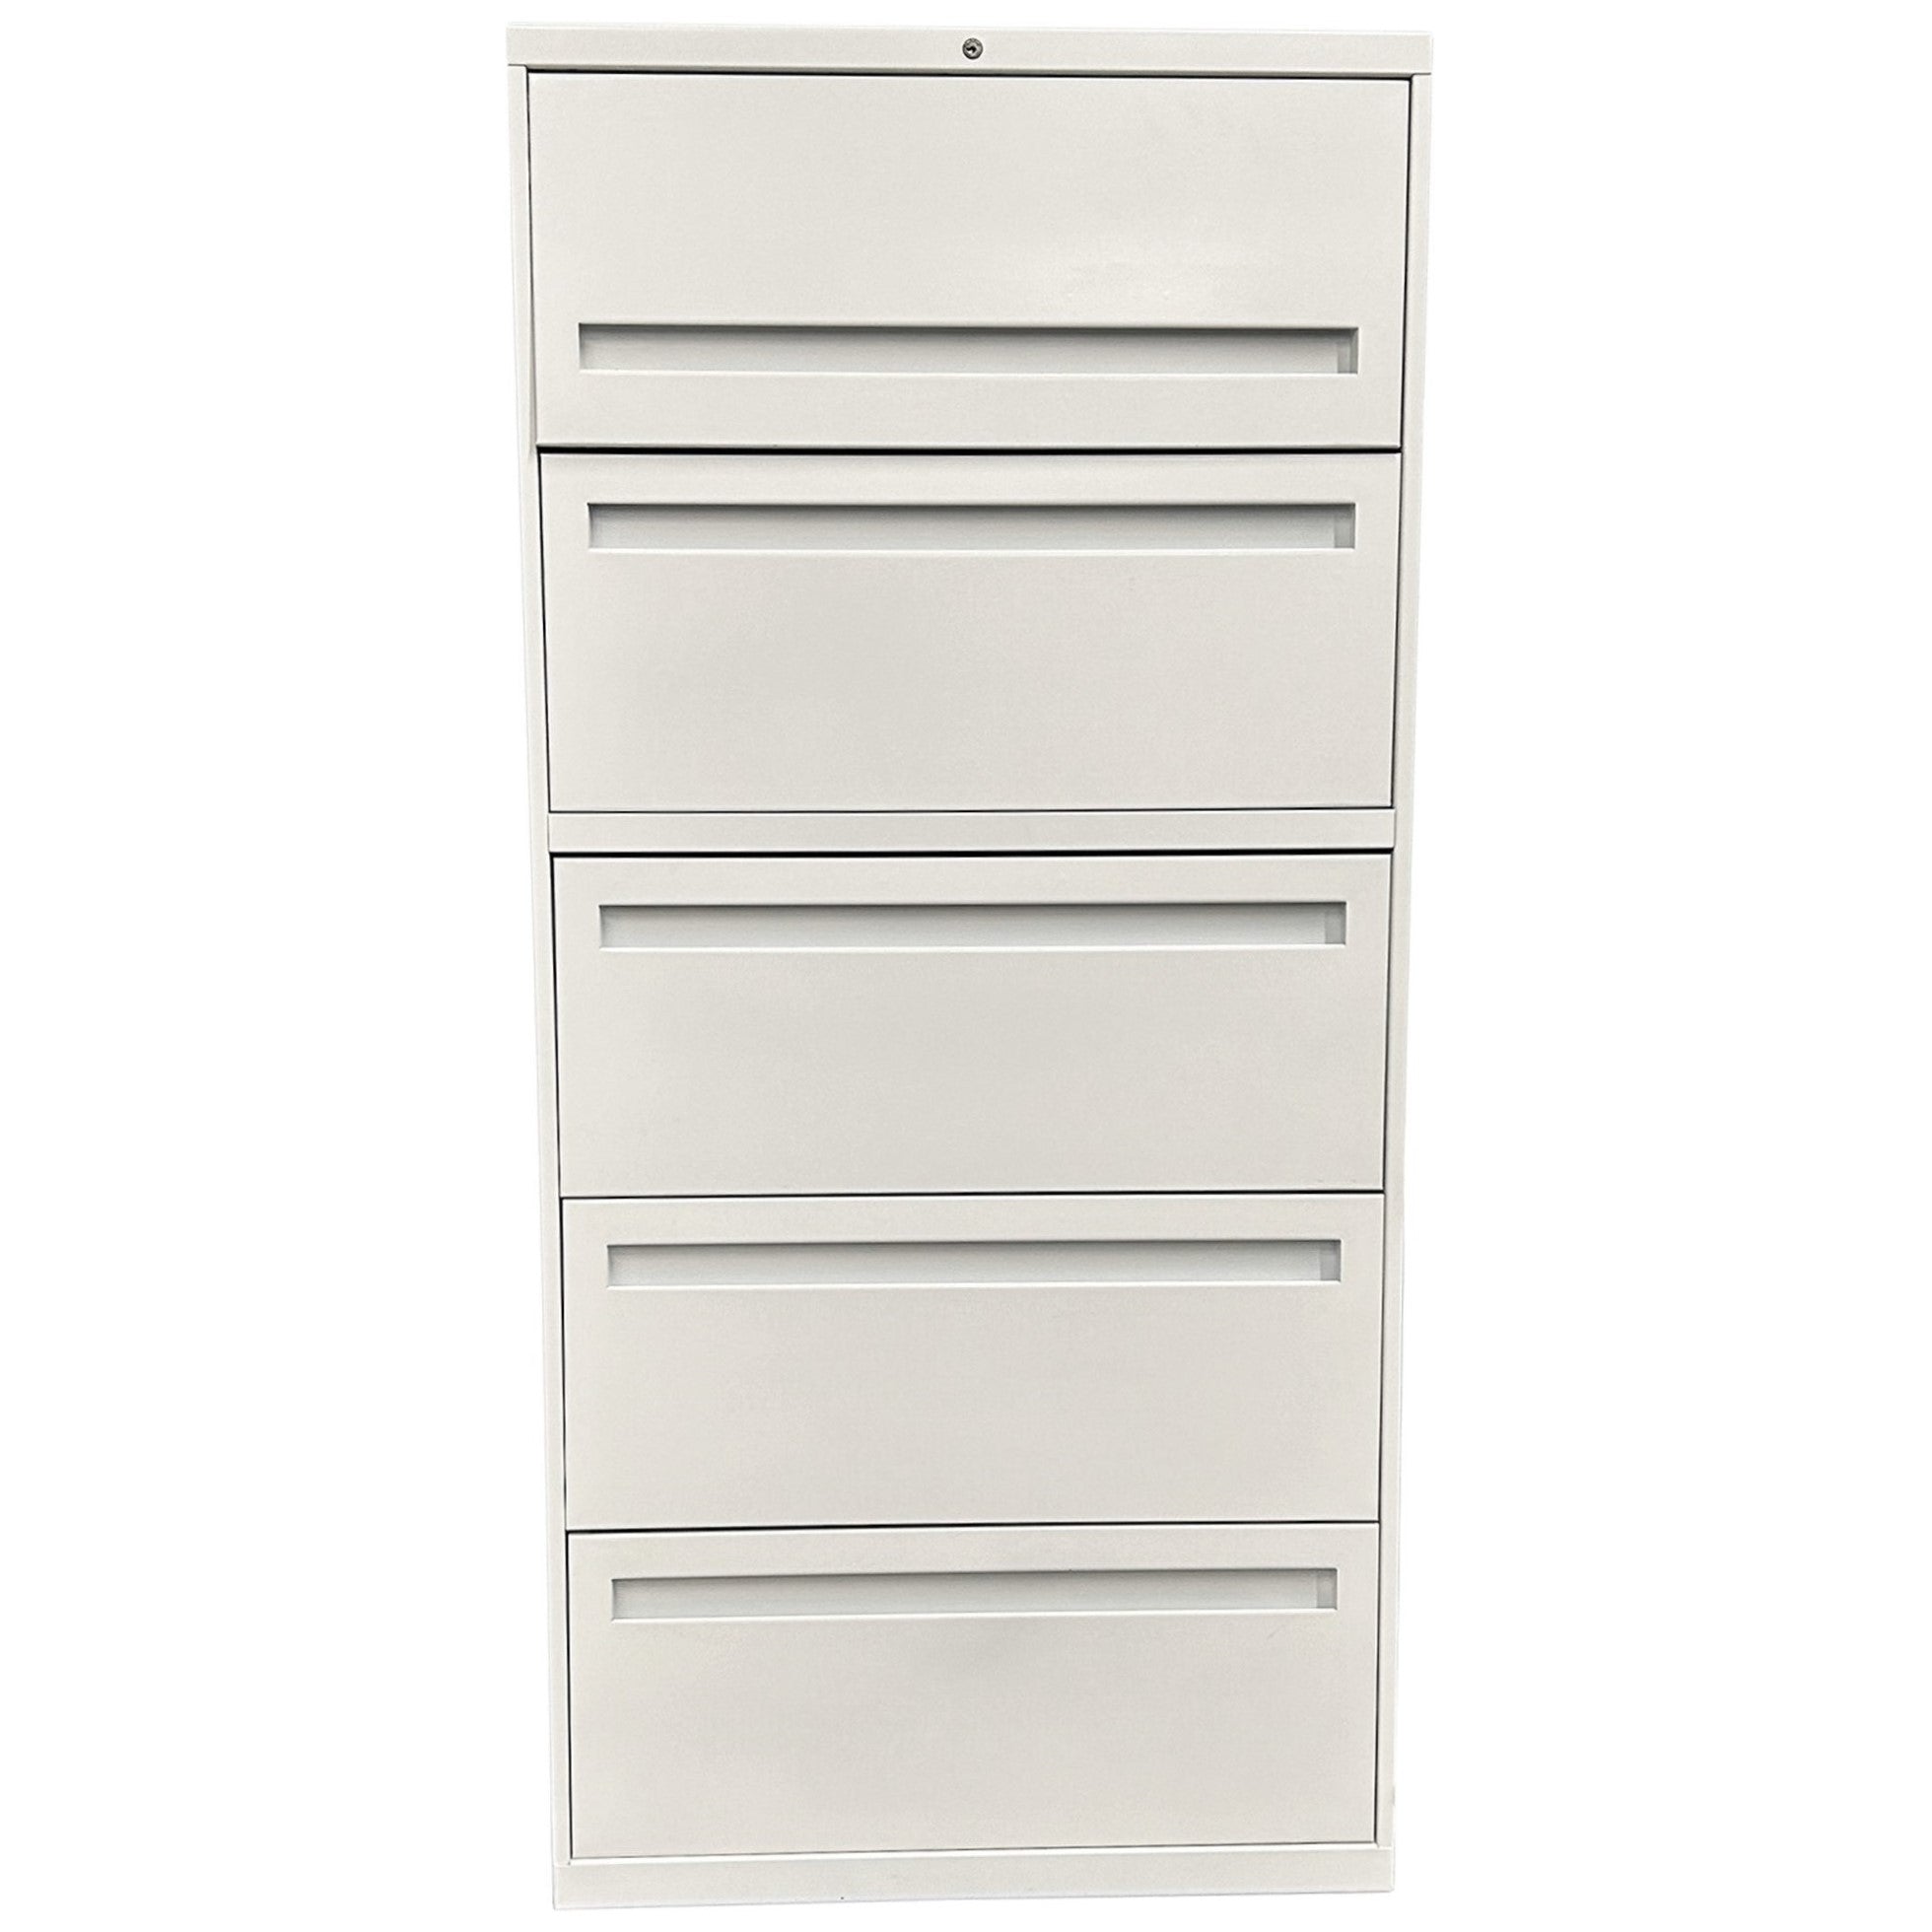 Allsteel Essentials 5 Drawer Lateral File, White - Preowned